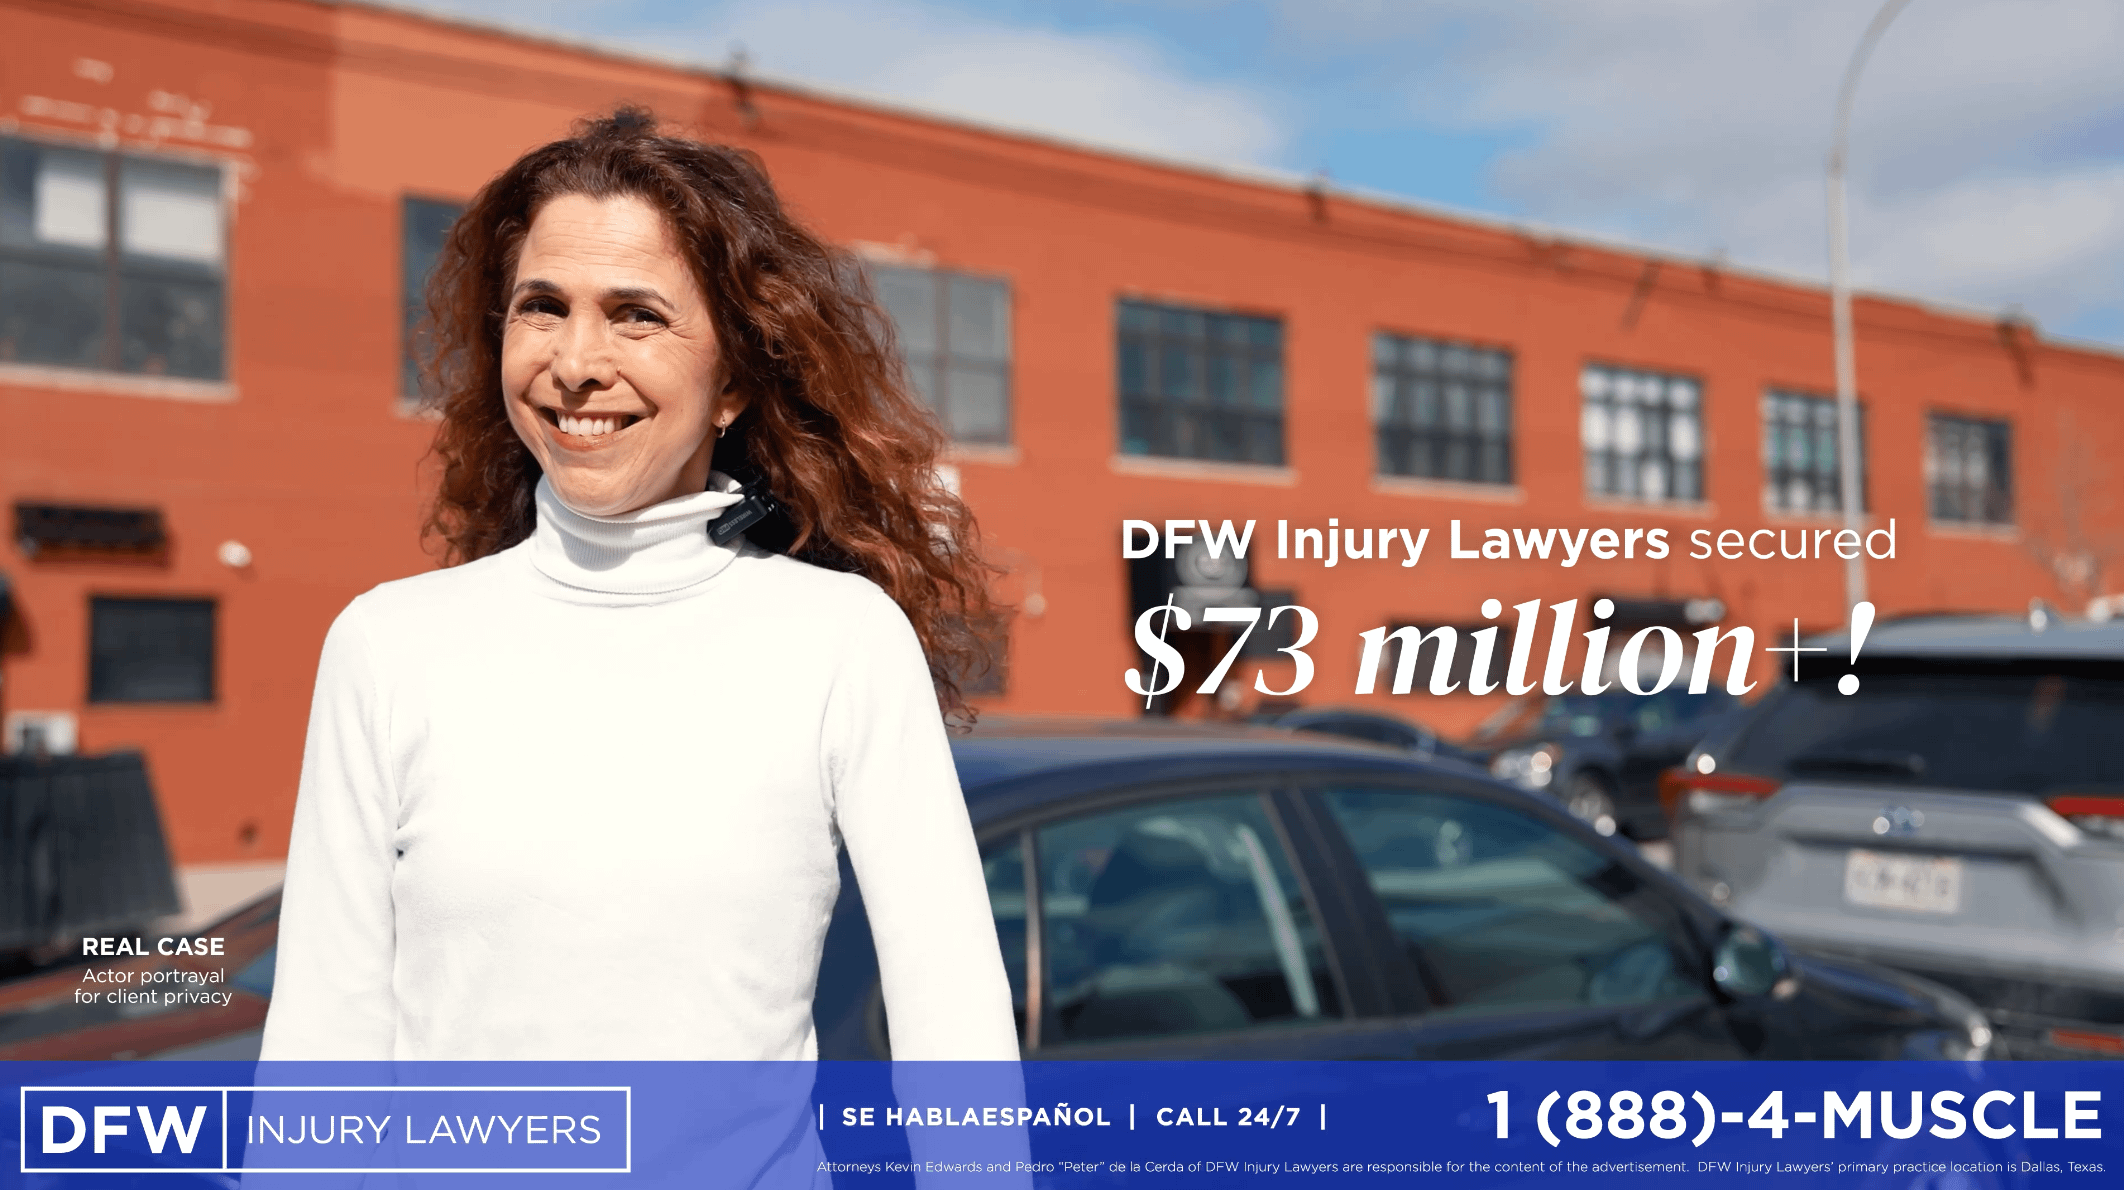 Injured by Defective Product? | $73 Million Verdict with DFW Injury Lawyers